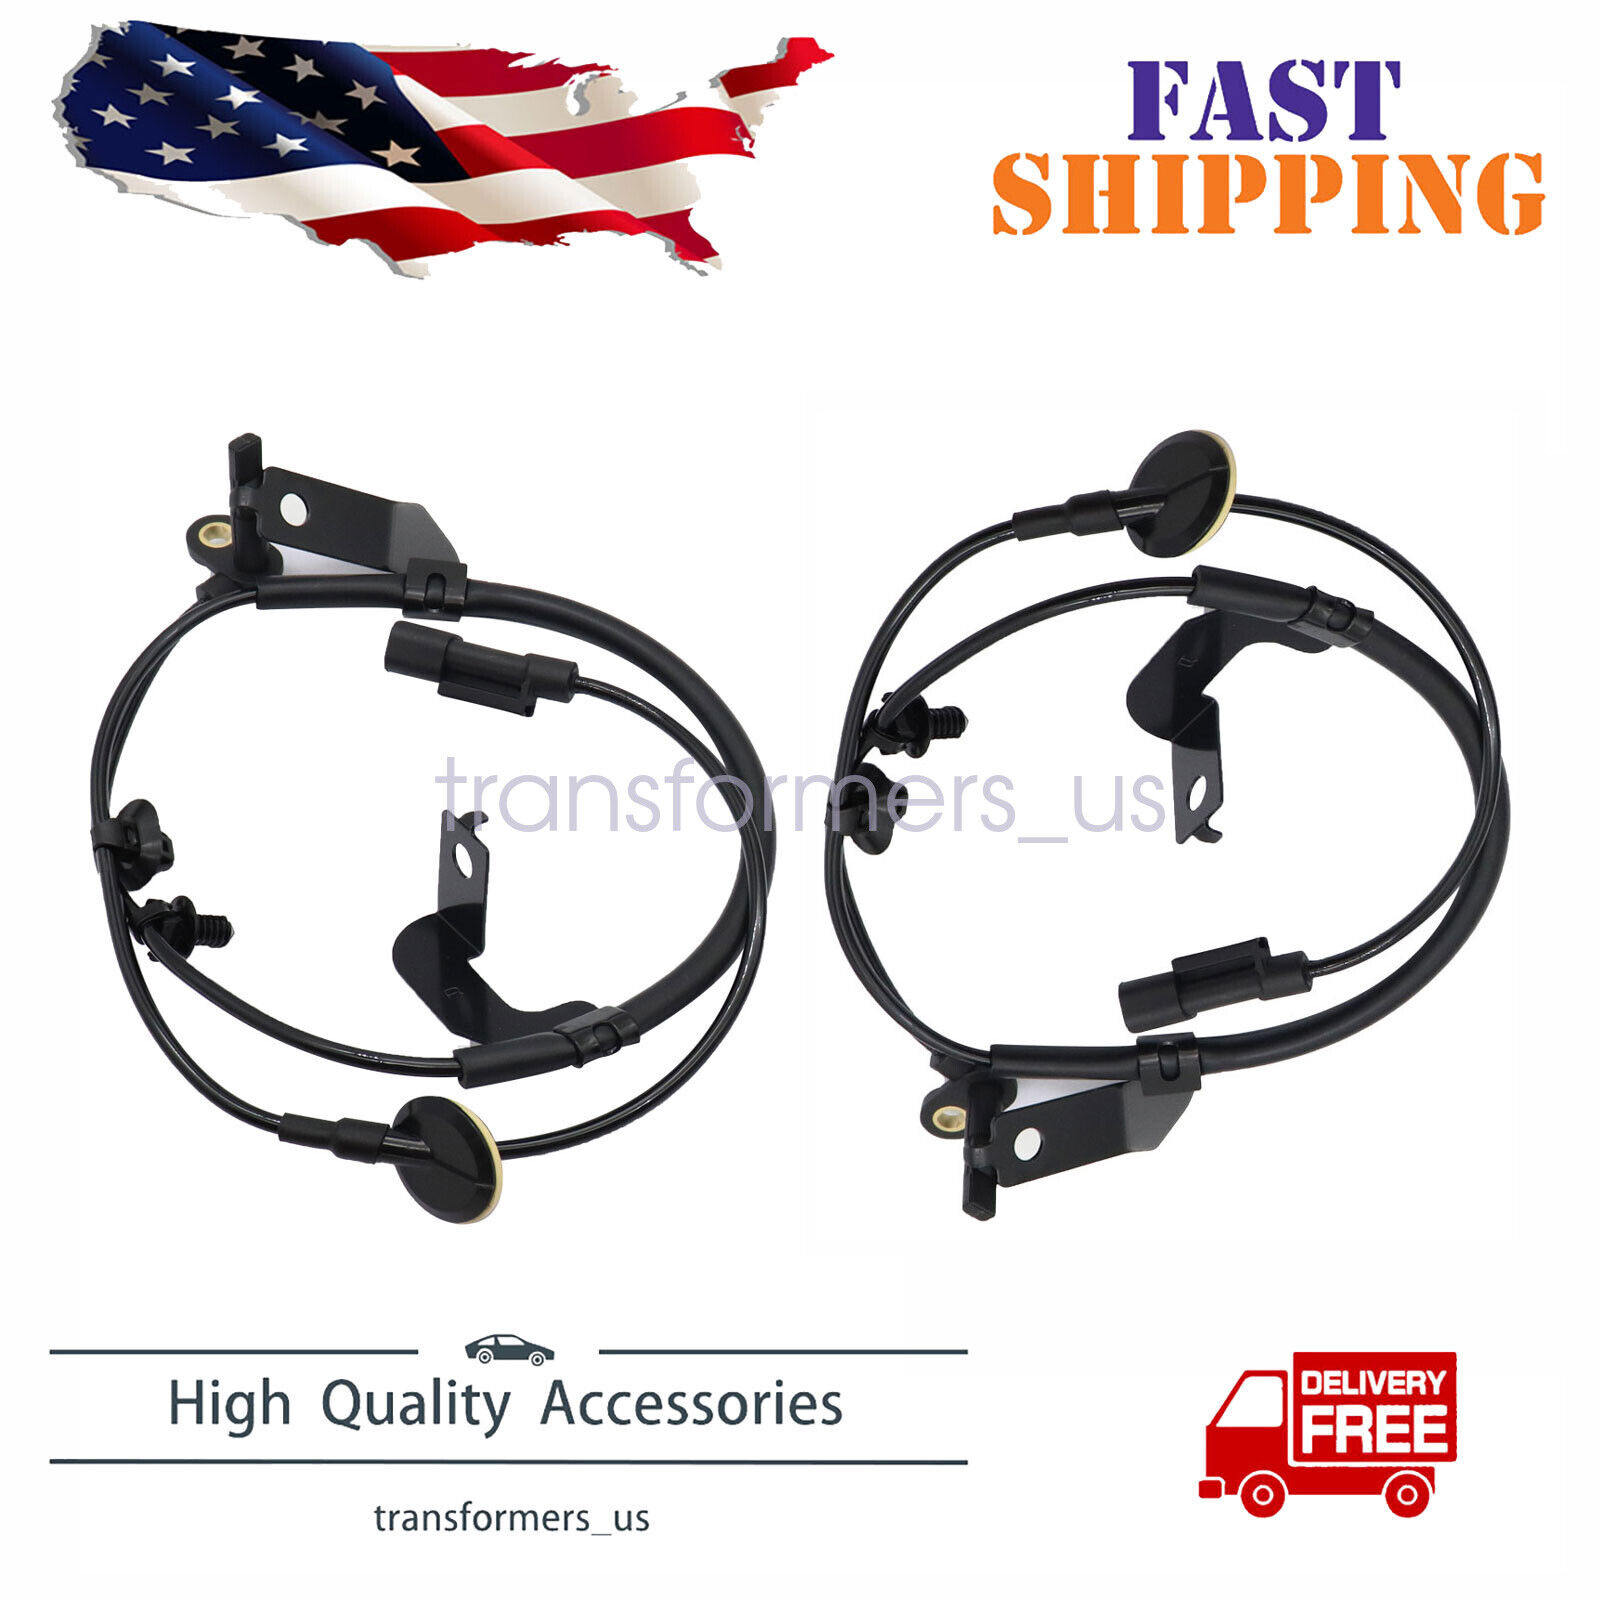 2 x ABS Speed Sensor Front Left & Right Side Fit for Dodge Journey 2010-2019